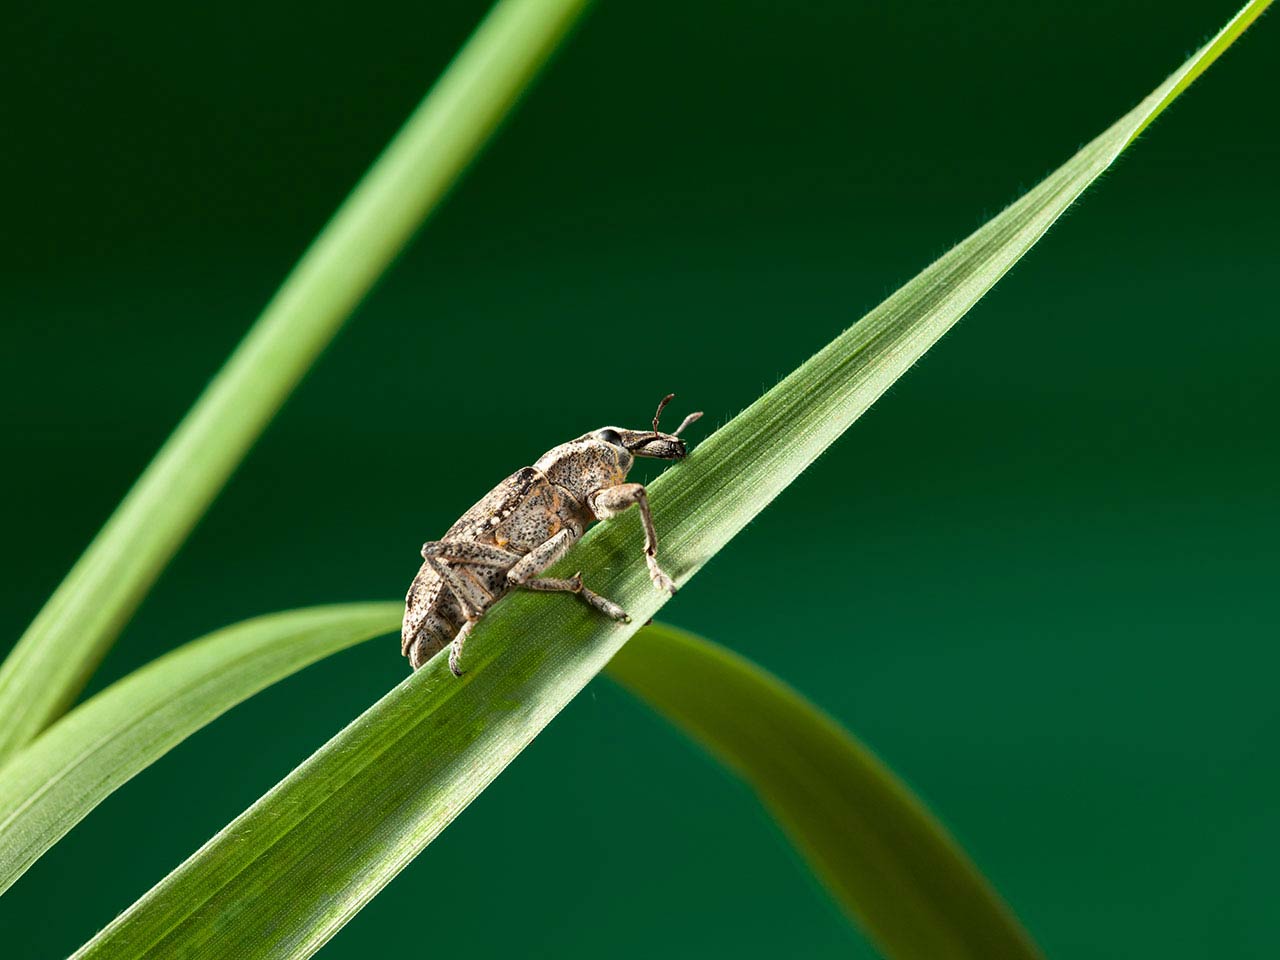 https://www.saga.co.uk/contentlibrary/saga/publishing/verticals/home-and-garden/gardening/advice-and-tips/pests/vine_weevil_1280.jpg